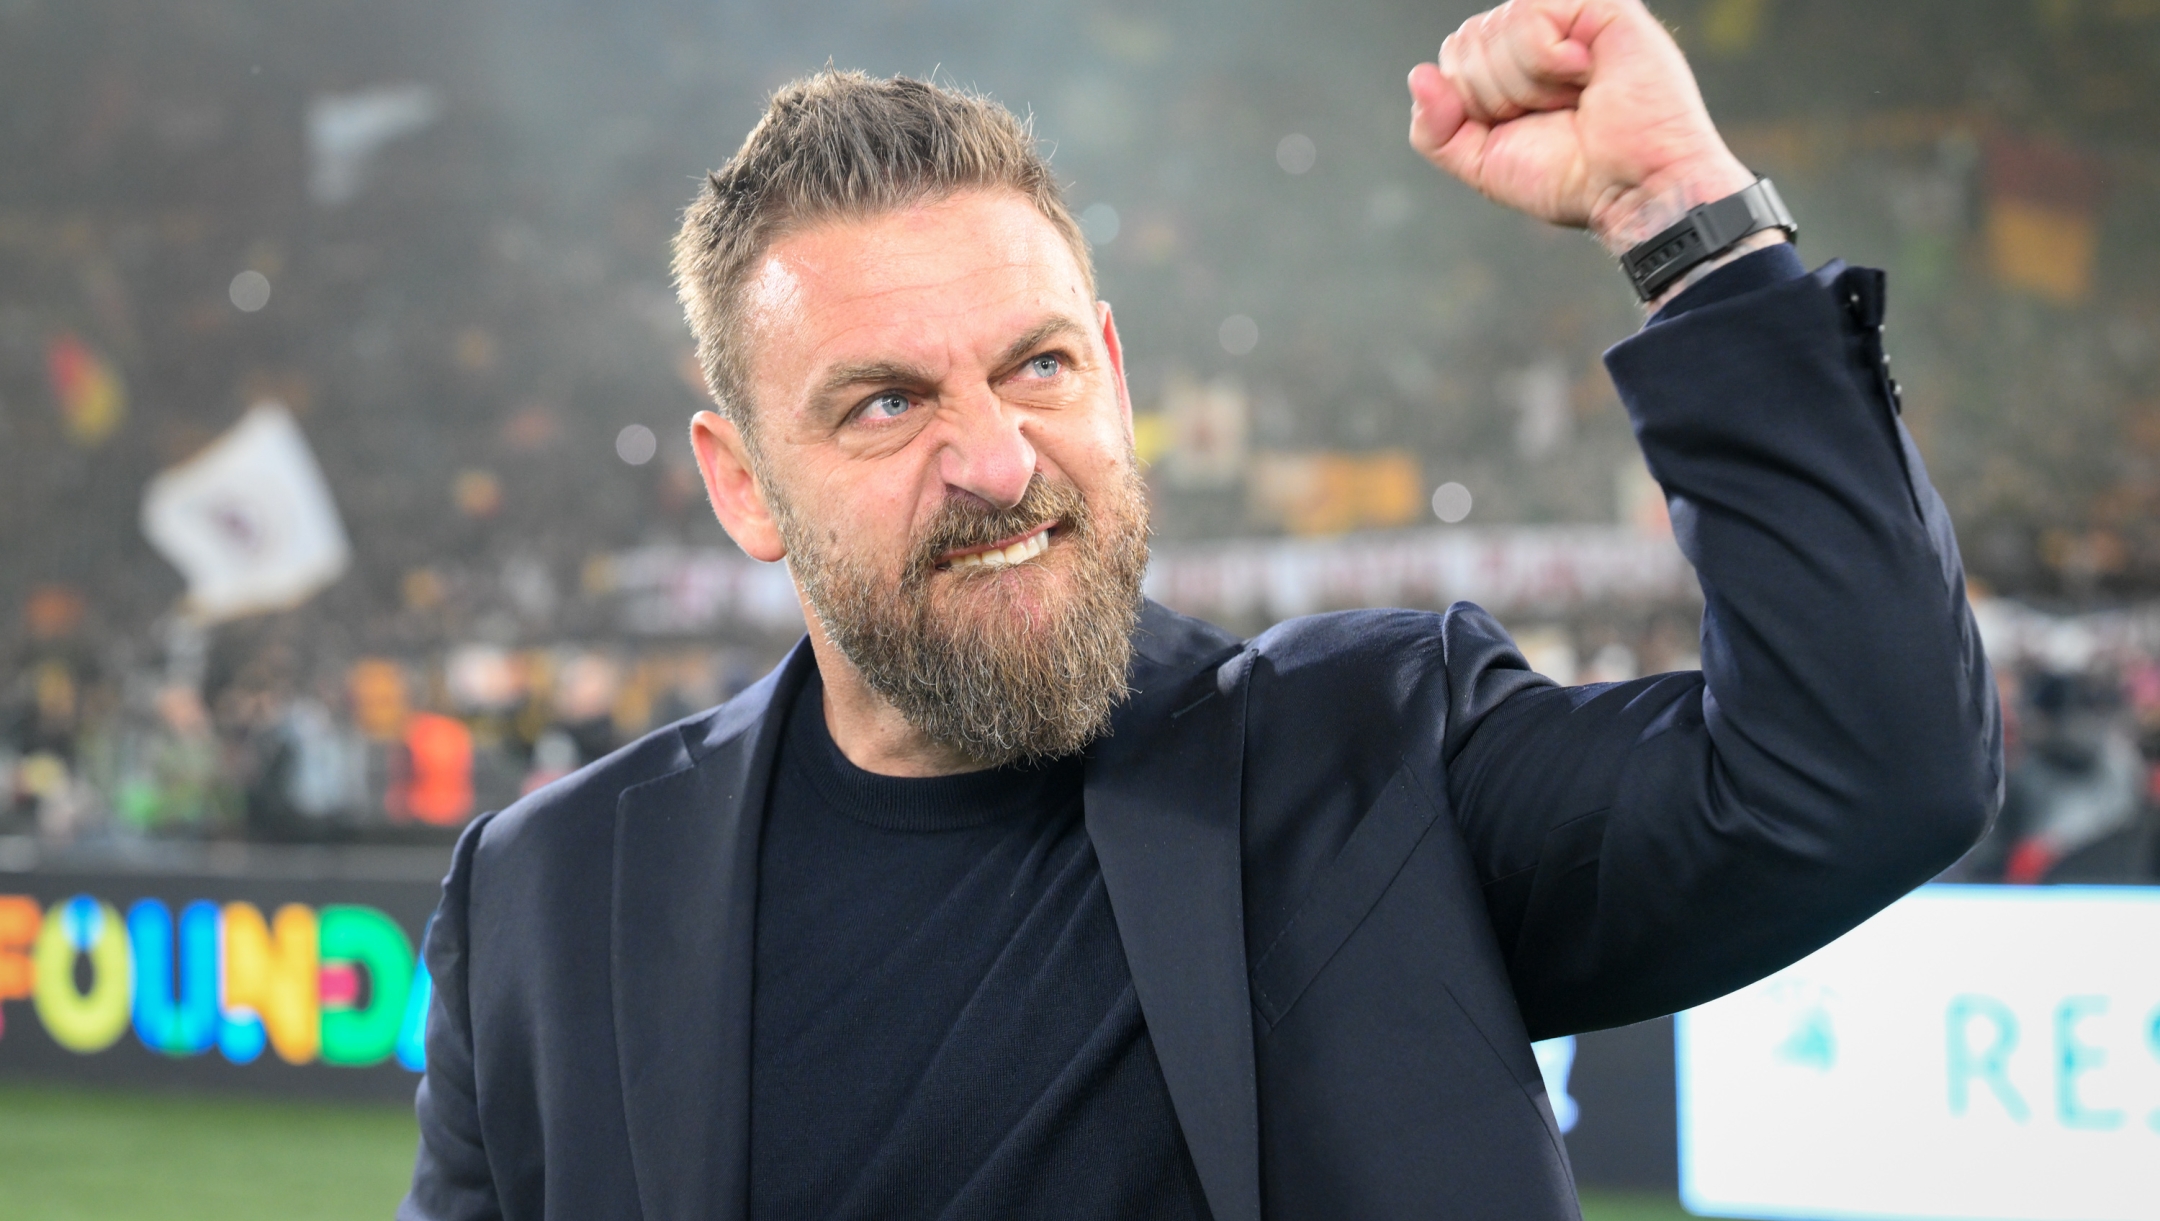 ROME, ITALY - FEBRUARY 22: AS Roma coach Daniele De Rossi celebrates the victory after the UEFA Europa League 2023/24 knockout round play-offs second leg match between AS Roma and Feyenoord at Stadio Olimpico on February 22, 2024 in Rome, Italy. (Photo by Fabio Rossi/AS Roma via Getty Images)